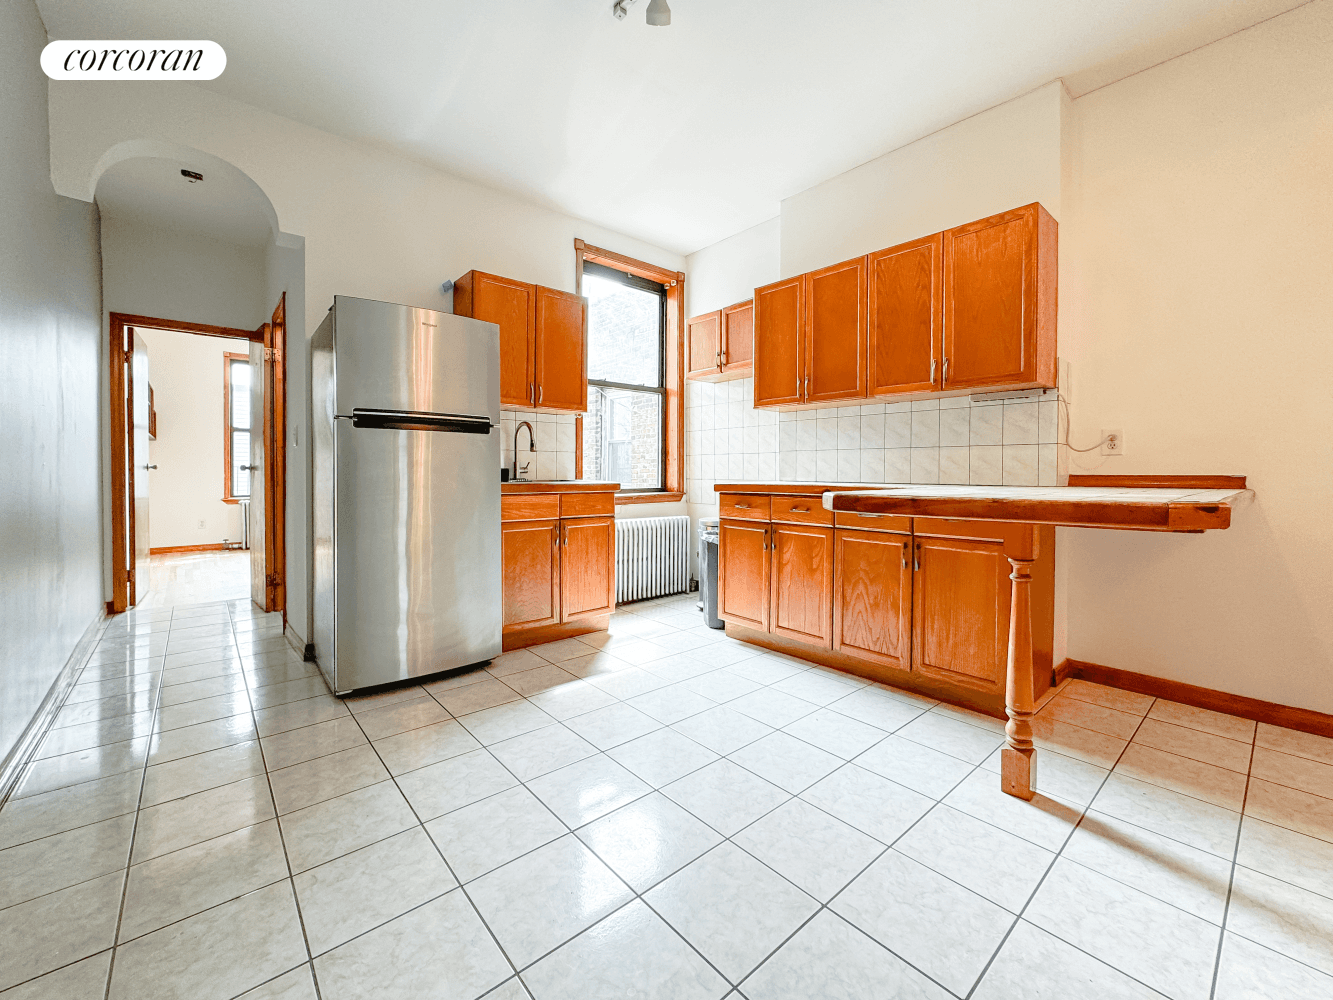 Situated on the top floor of a multifamily home, this railroad unit features two beds and one bath.